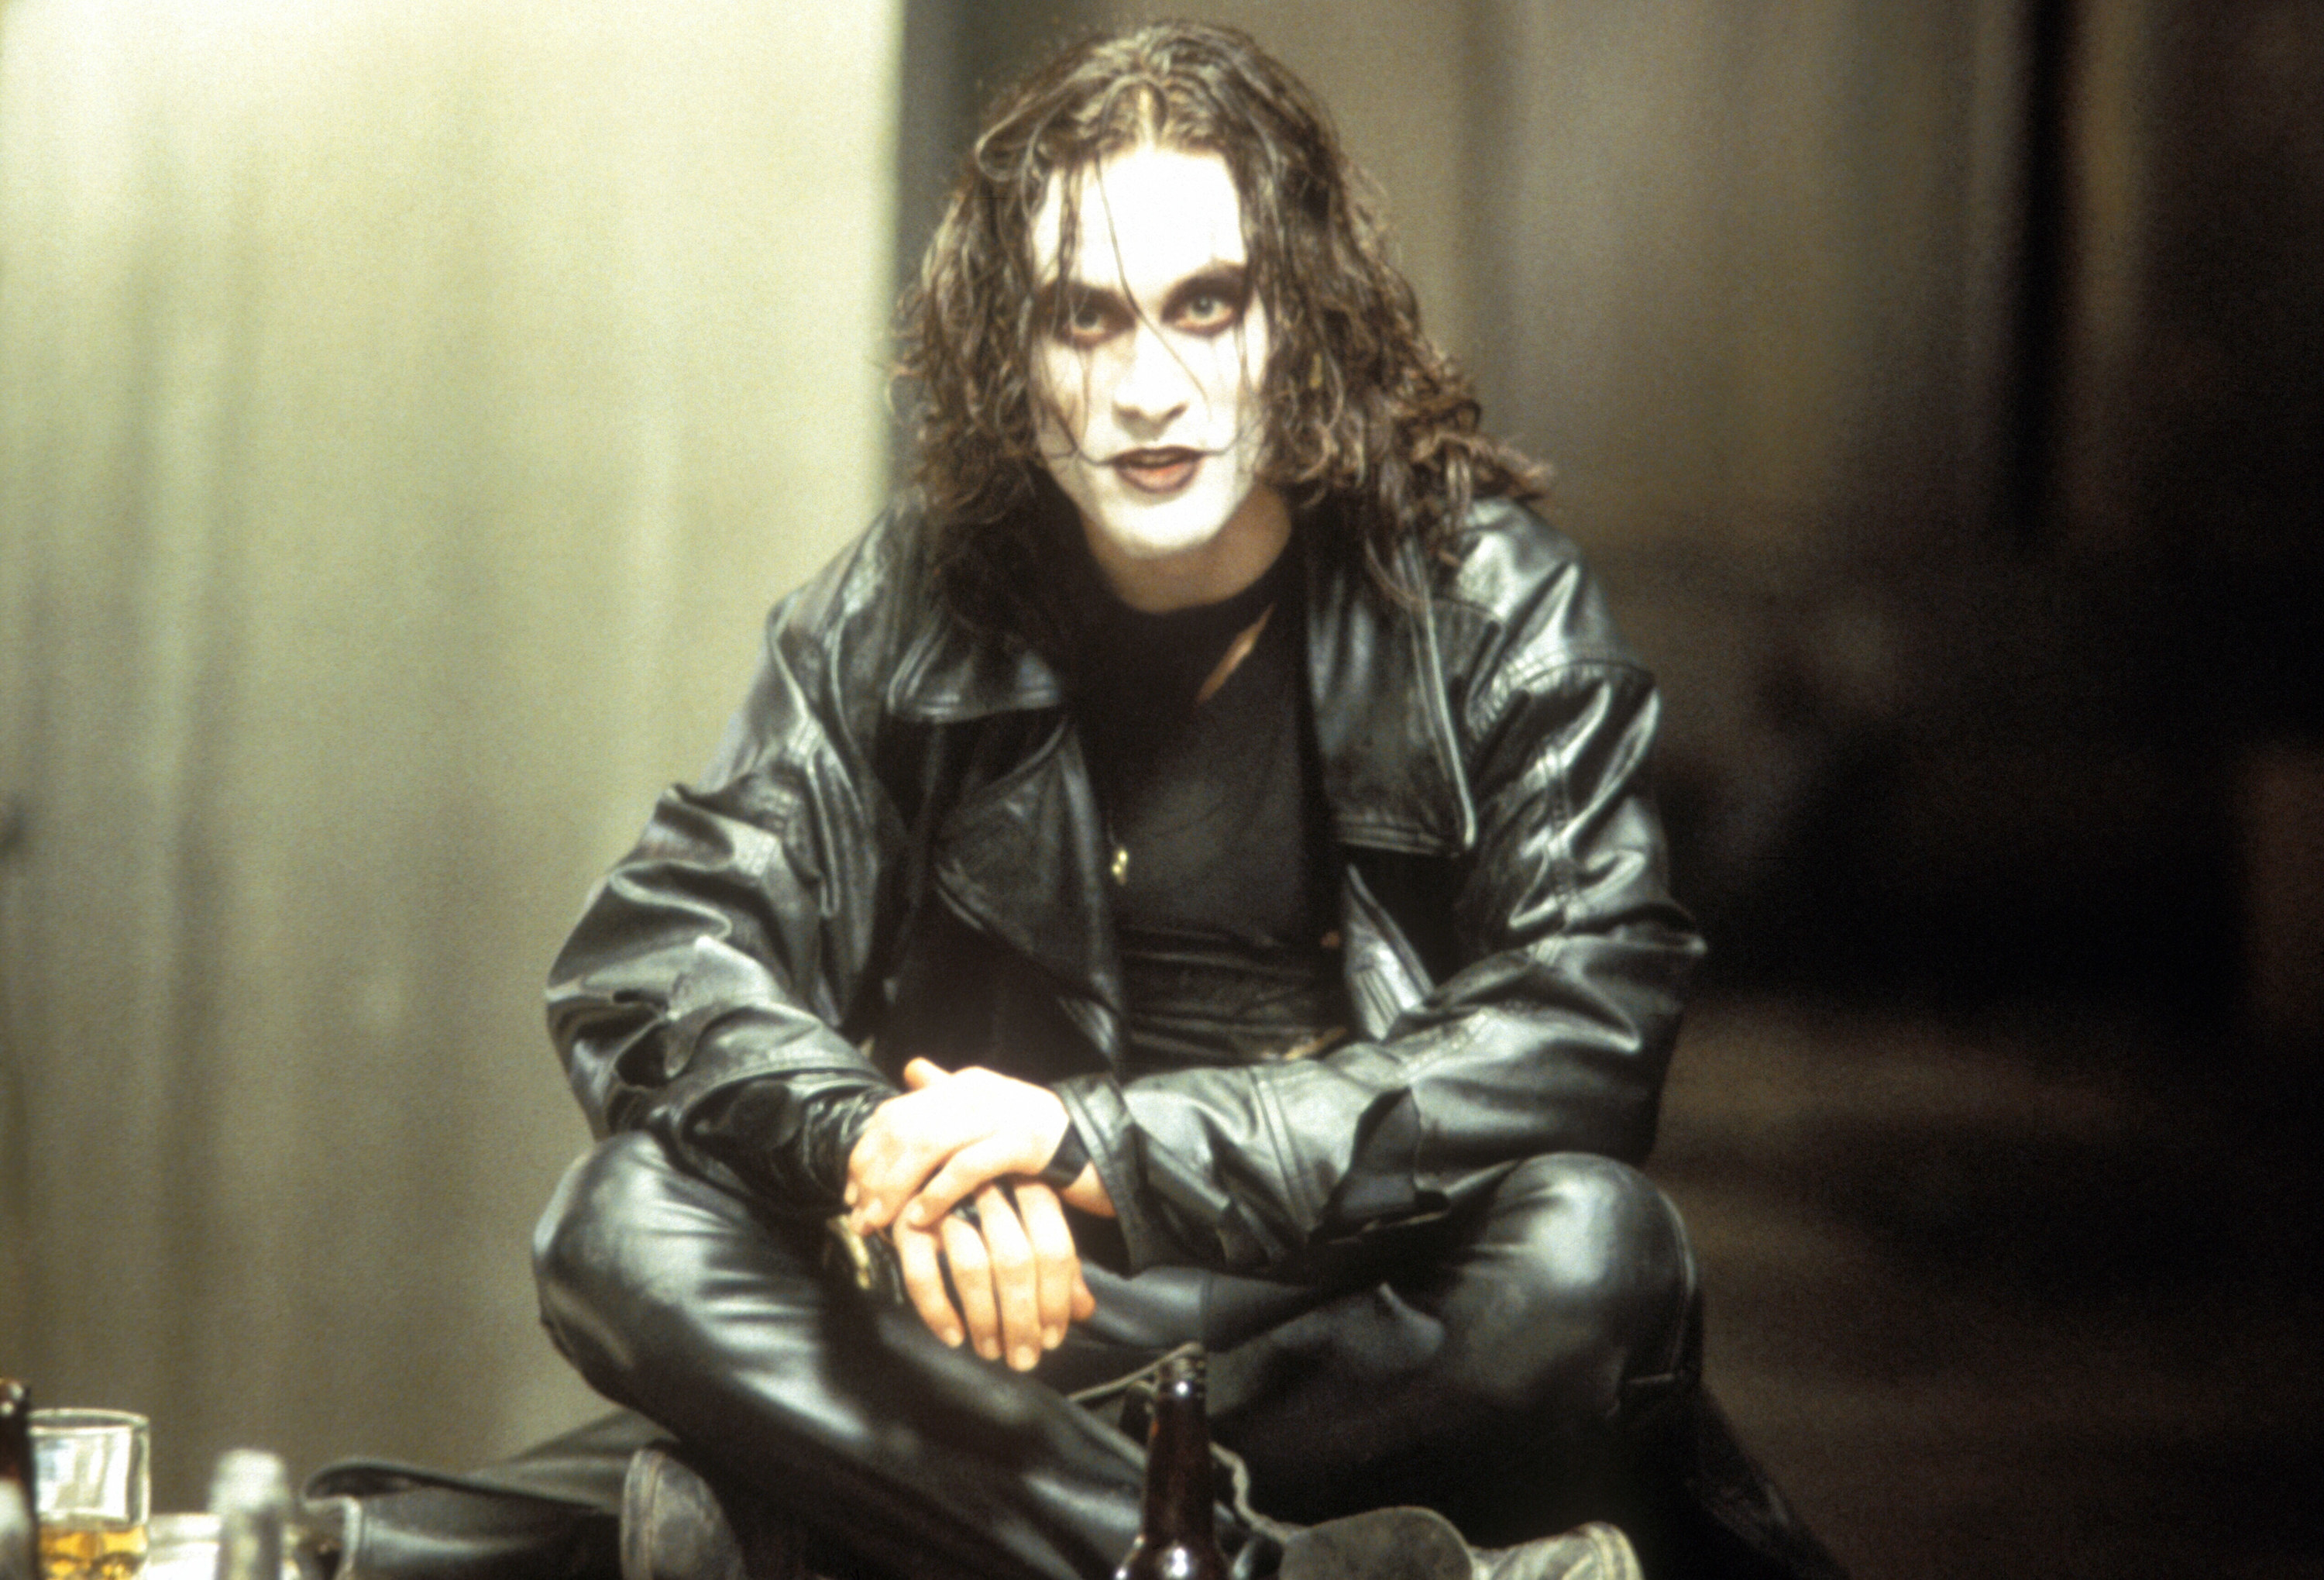 Brandon as the Crow, wearing leather with white makeup and long hair